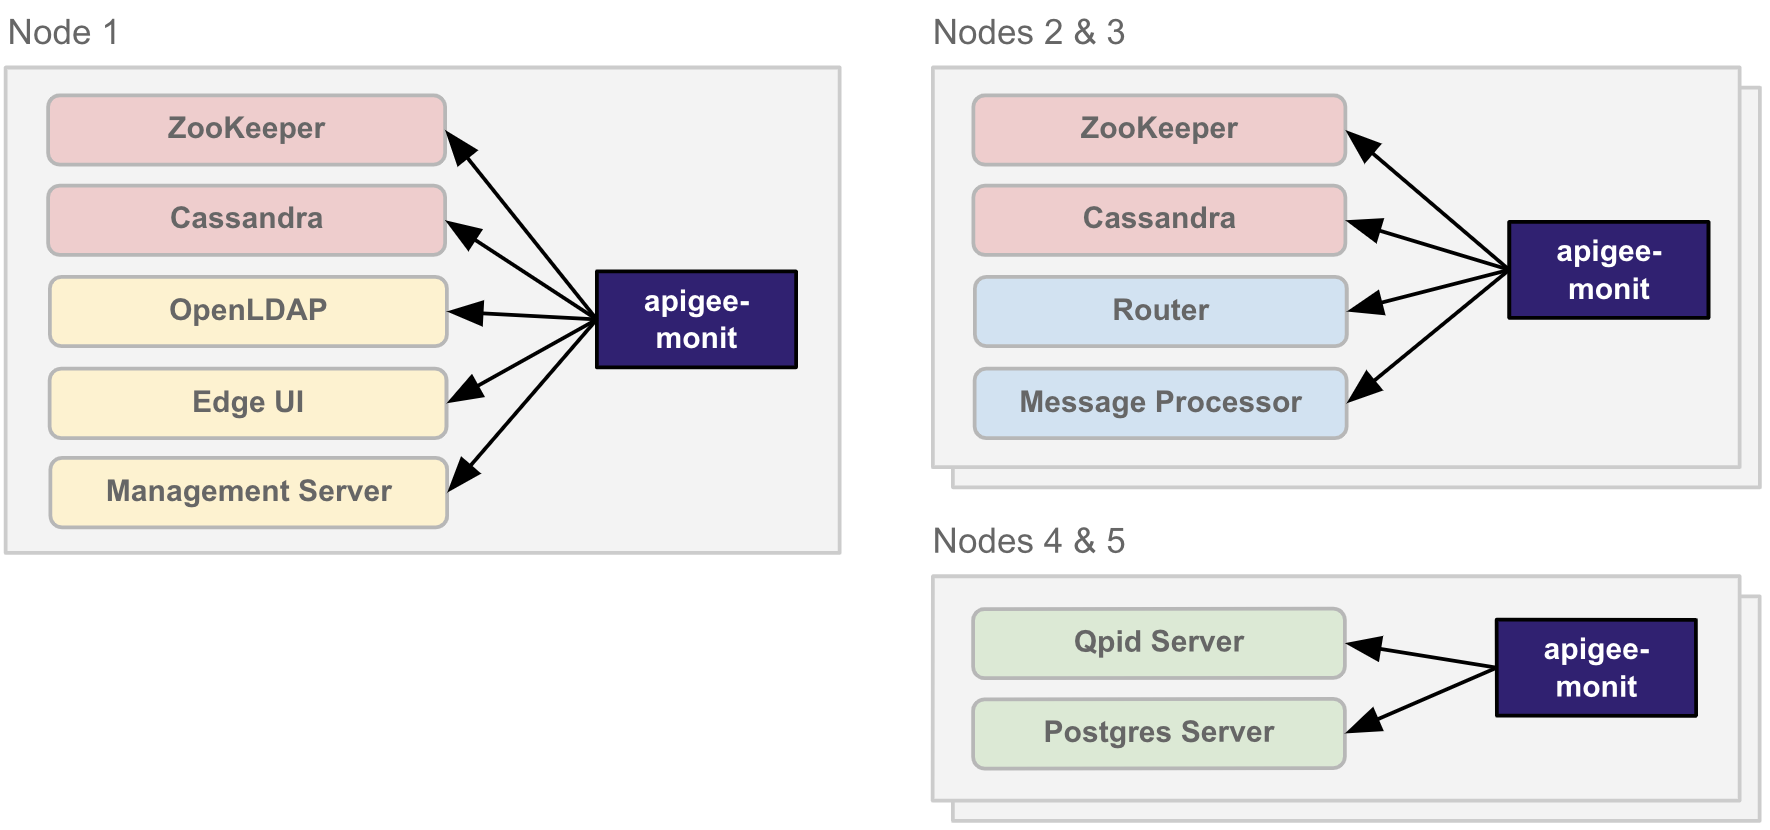 Architecture
  of Apigee monit in a 5 node cluster